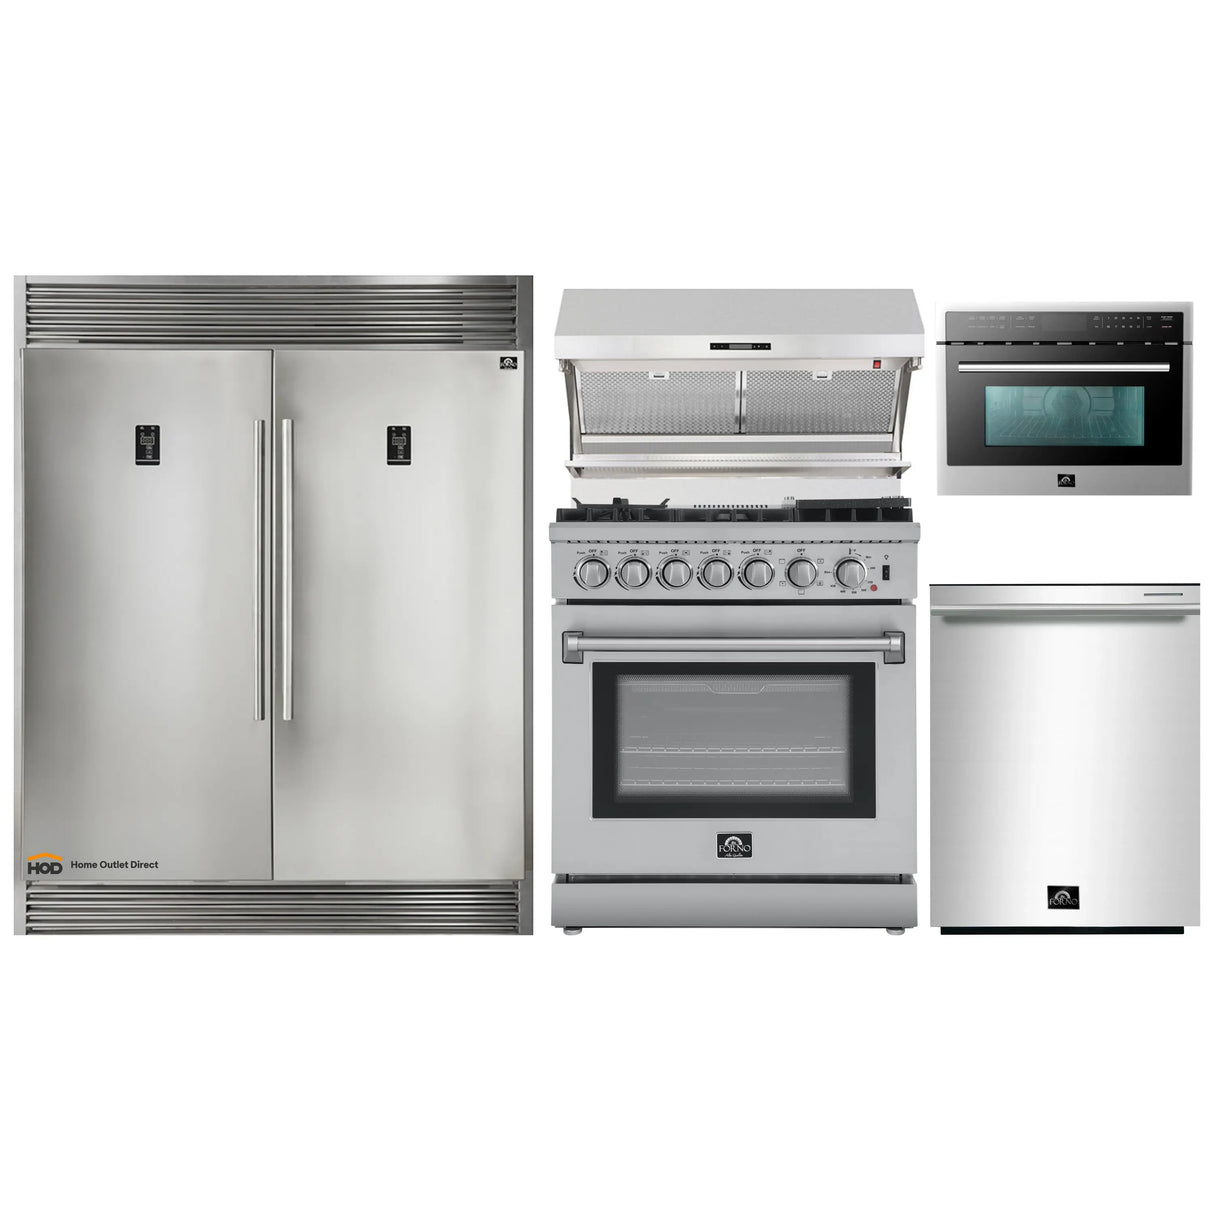 Forno 5-Piece Appliance Package - 30-Inch Dual Fuel Range with Air Fryer, 56-Inch Pro-Style Refrigerator, Wall Mount Hood with Backsplash, Microwave Oven, & 3-Rack Dishwasher in Stainless Steel